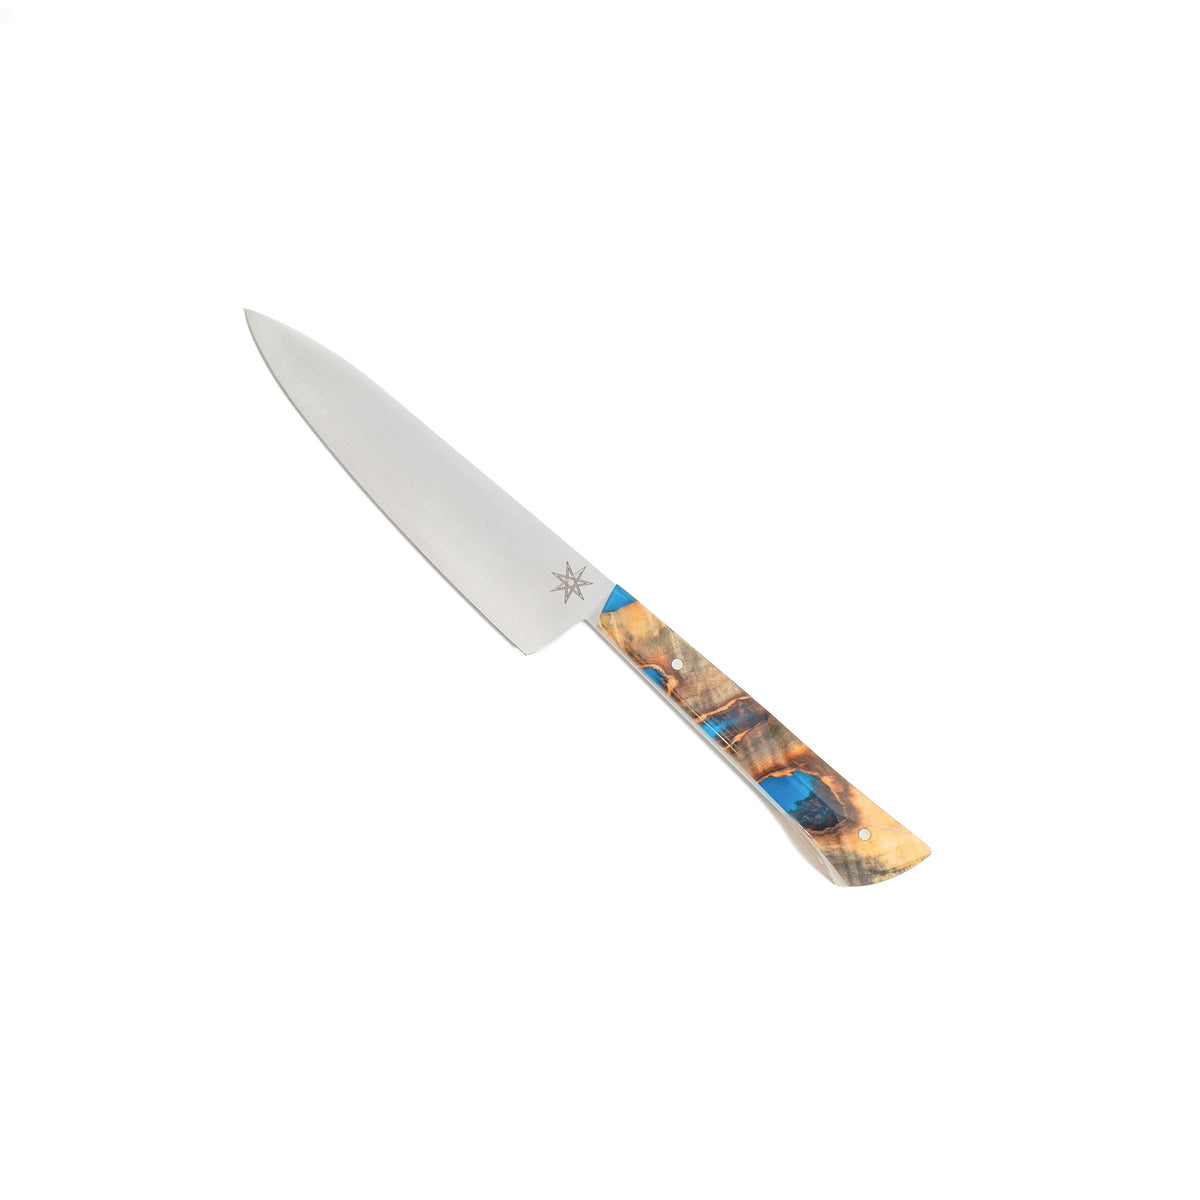 Town Cutler Tahoe Bliss Utility Petty Knife. Nitro-V stainless steel blade with blue and buckeye burl handle.